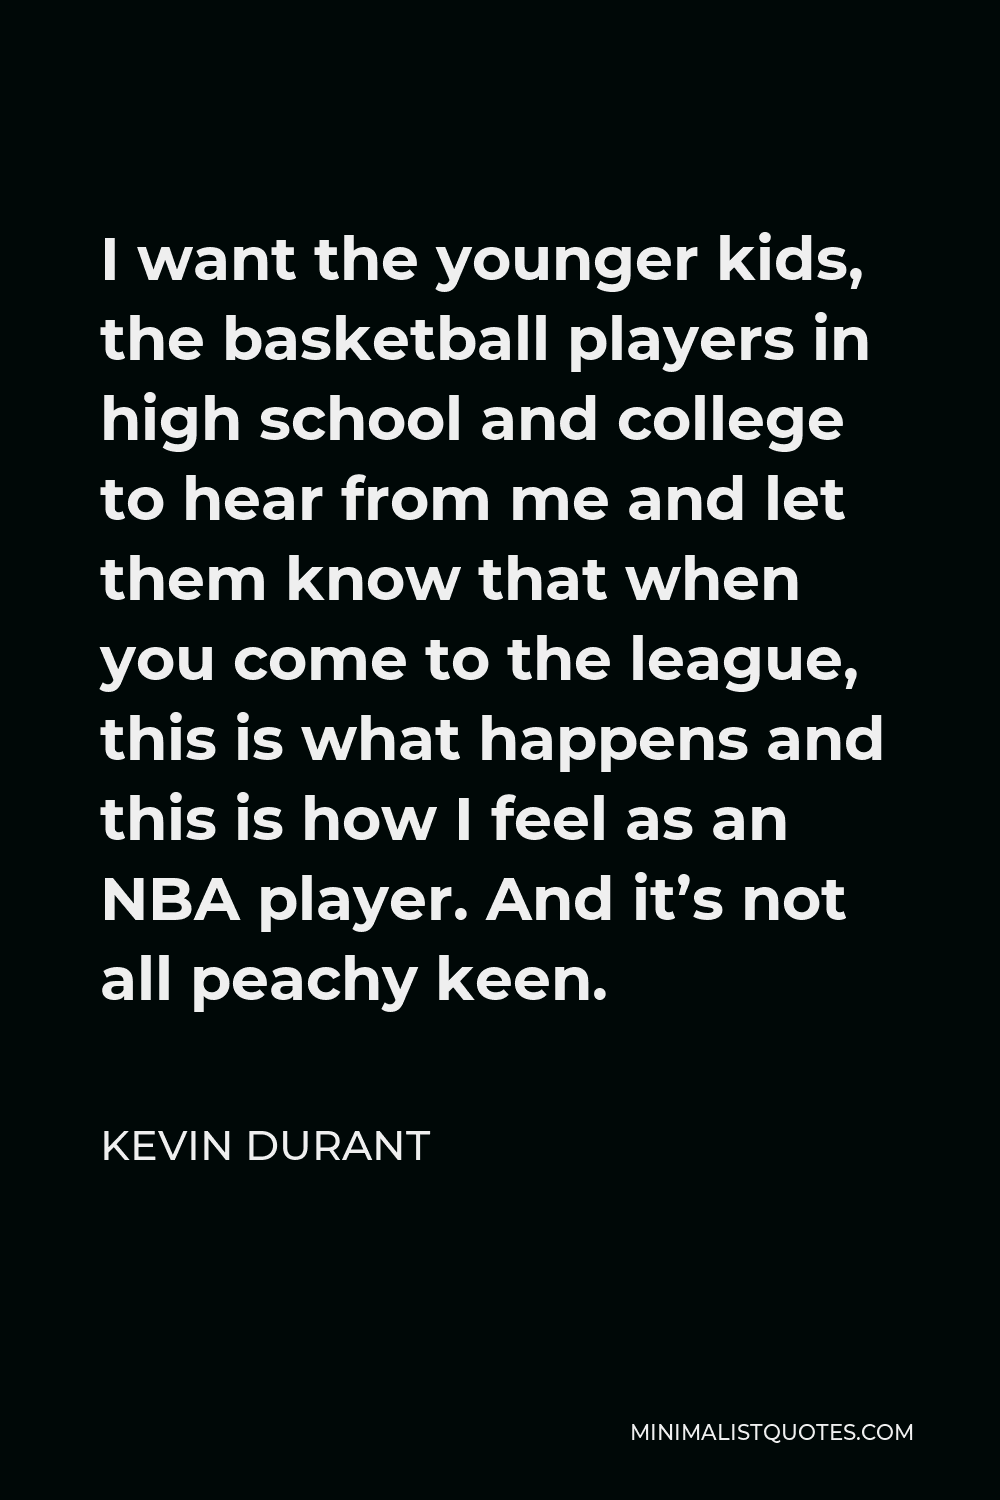 Kevin Durant Quote - I want the younger kids, the basketball players in high school and college to hear from me and let them know that when you come to the league, this is what happens and this is how I feel as an NBA player. And it’s not all peachy keen.